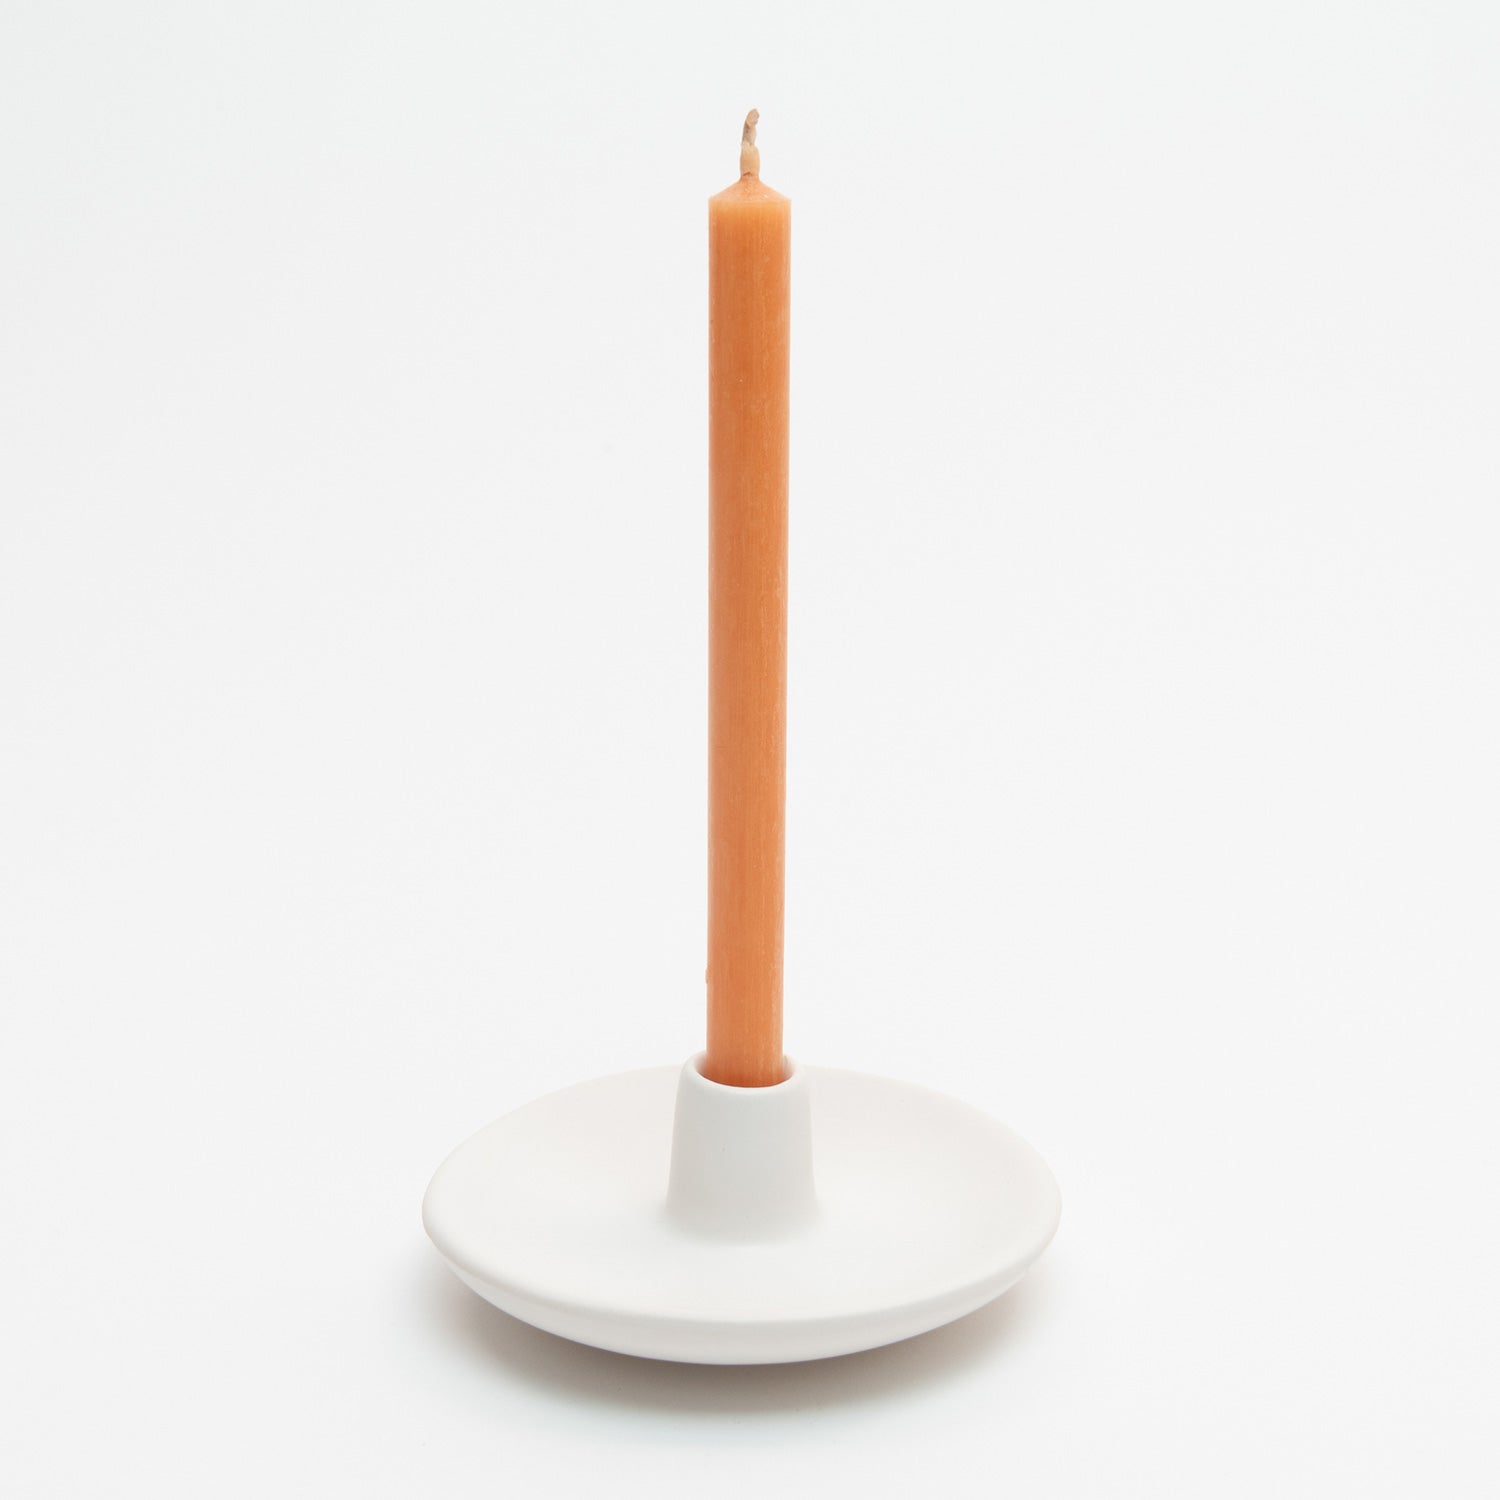 St Eval Mini Candle Holder. Small ceramic white dish with holder protruding up from centre, containing a St Eval Orange and Cinnamon Candle.